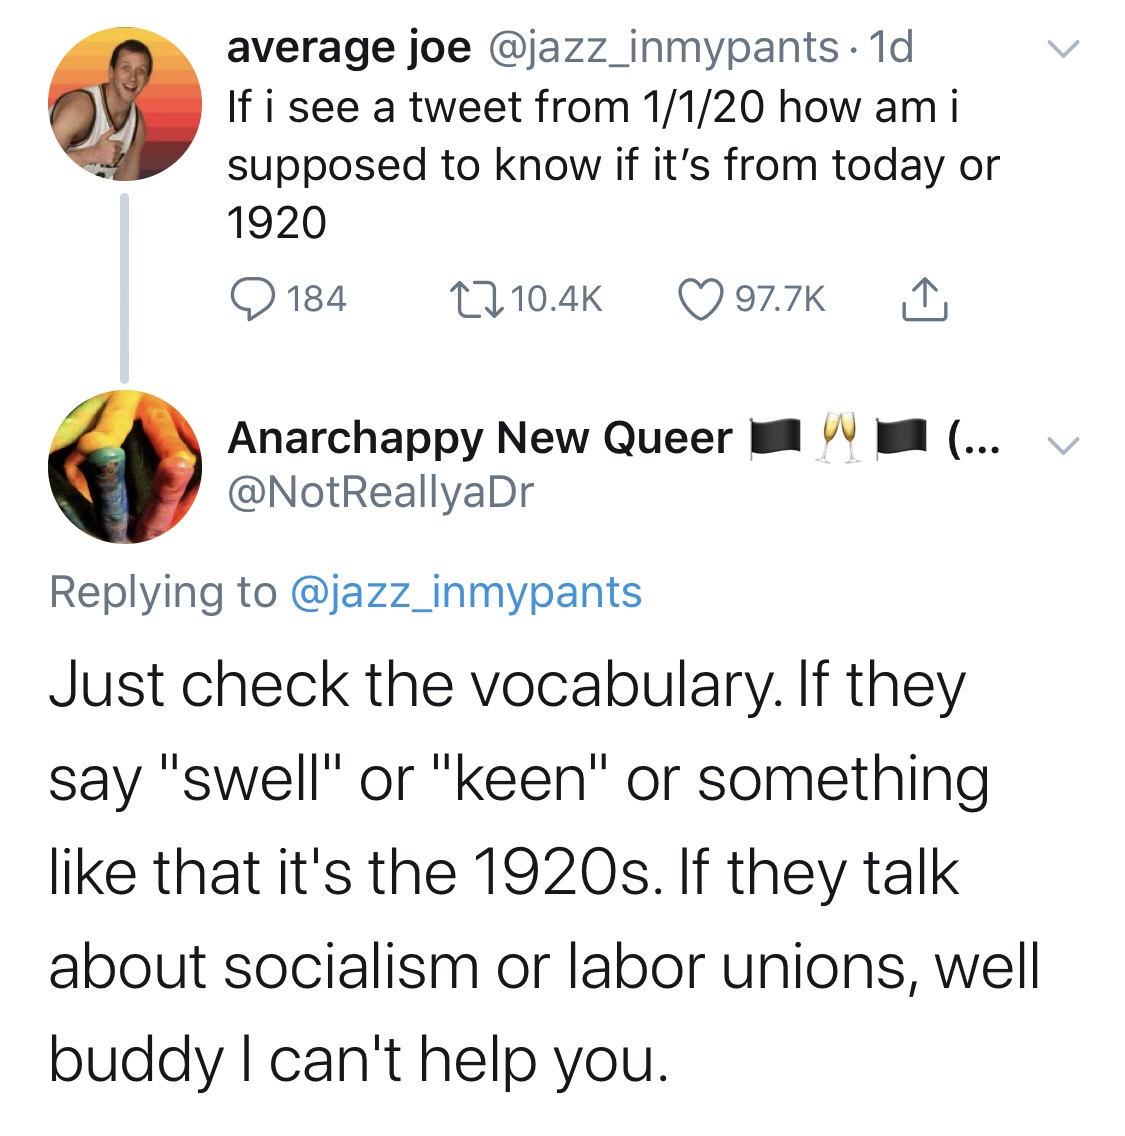 angle - average joe 1d If i see a tweet from 1120 how ami supposed to know if it's from today or 1920 Q 184 27 Anarchappy New Queer ... v Just check the vocabulary. If they say "swell" or "keen" or something that it's the 1920s. If they talk about sociali